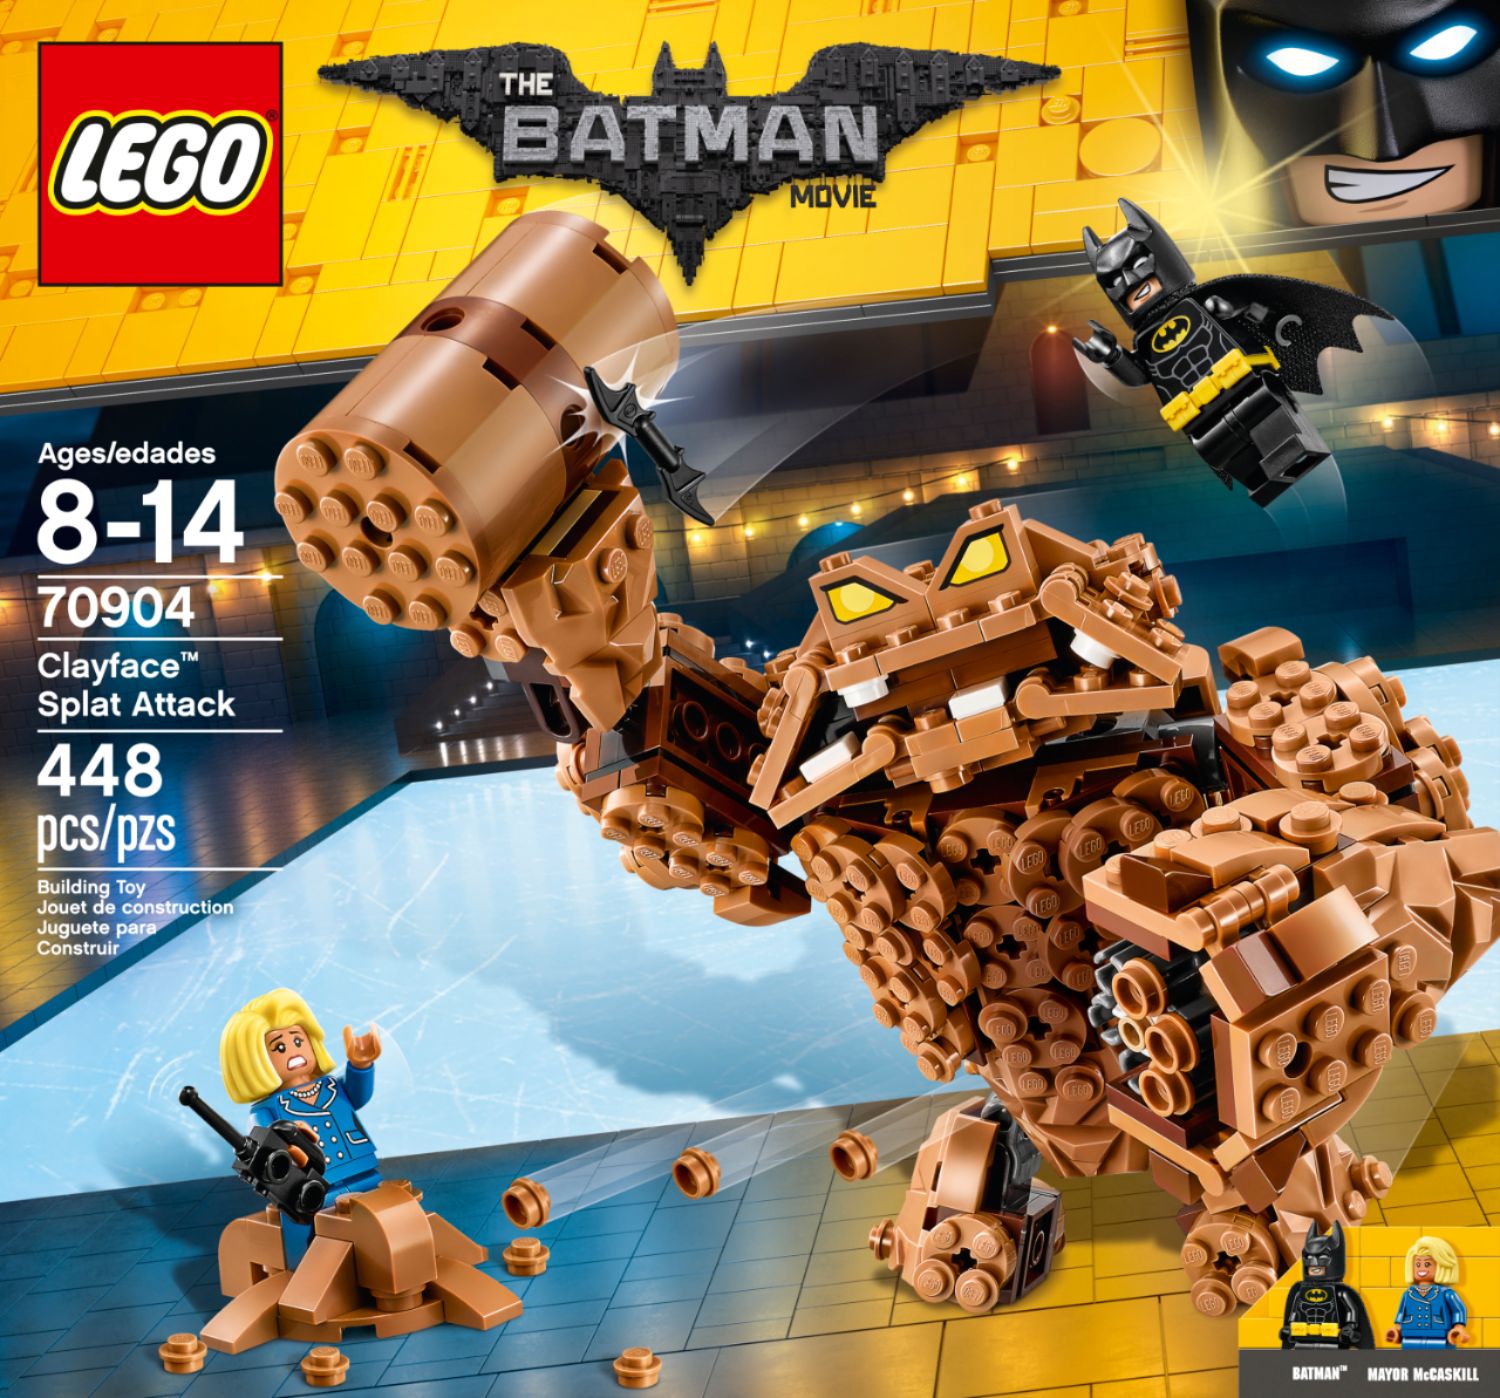 Best Buy: The LEGO Batman Movie: Clayface Splat Attack Multi colored 6175858